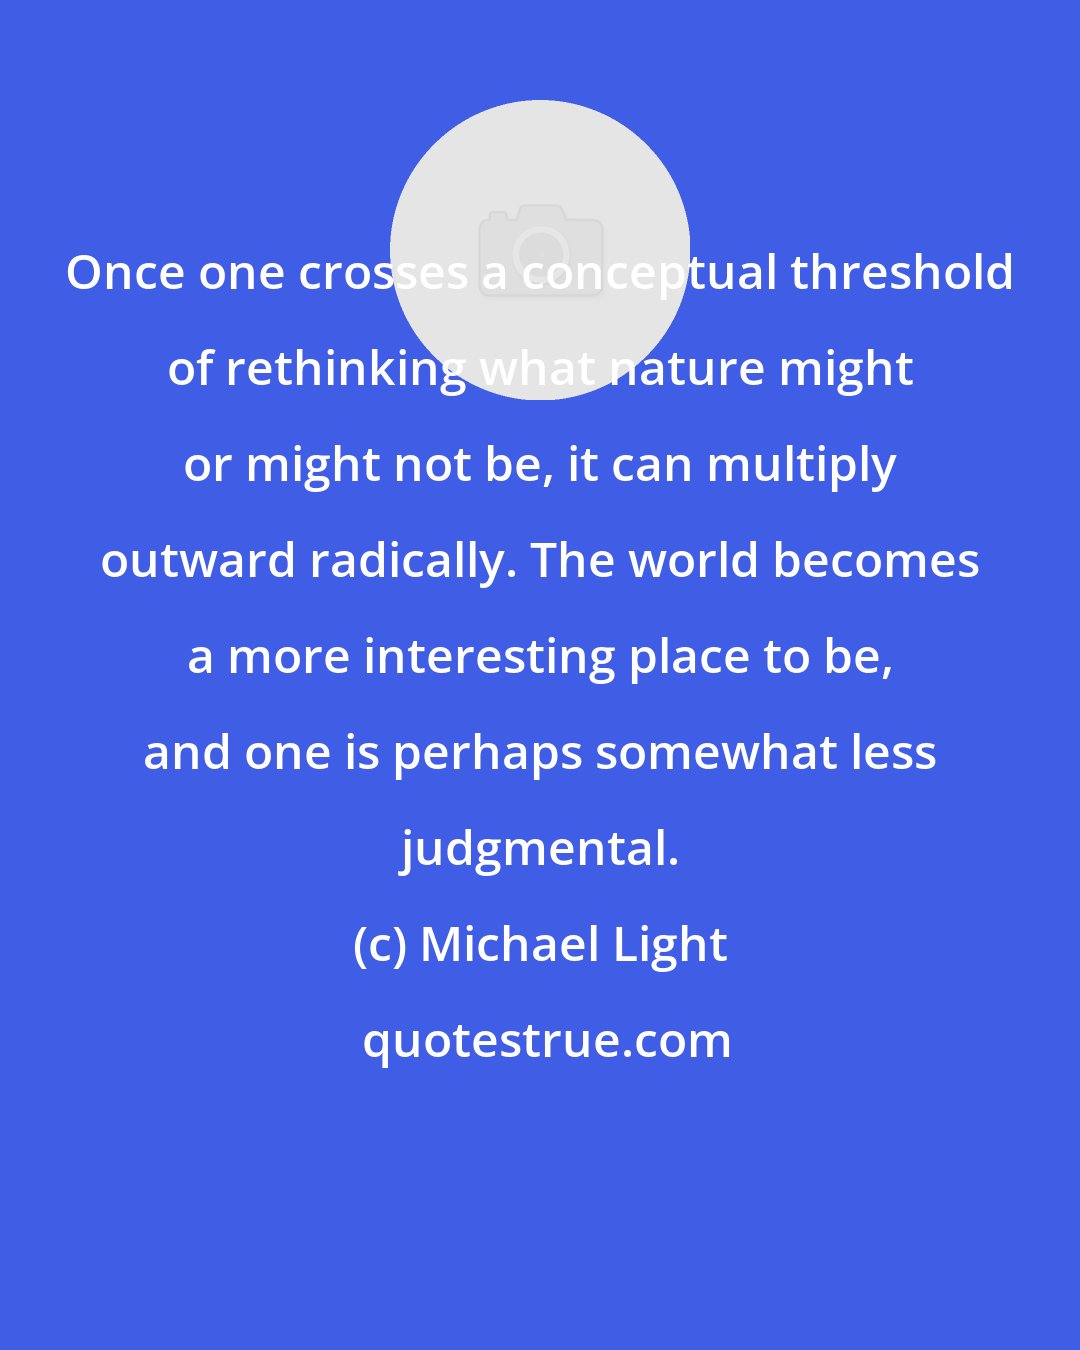 Michael Light: Once one crosses a conceptual threshold of rethinking what nature might or might not be, it can multiply outward radically. The world becomes a more interesting place to be, and one is perhaps somewhat less judgmental.